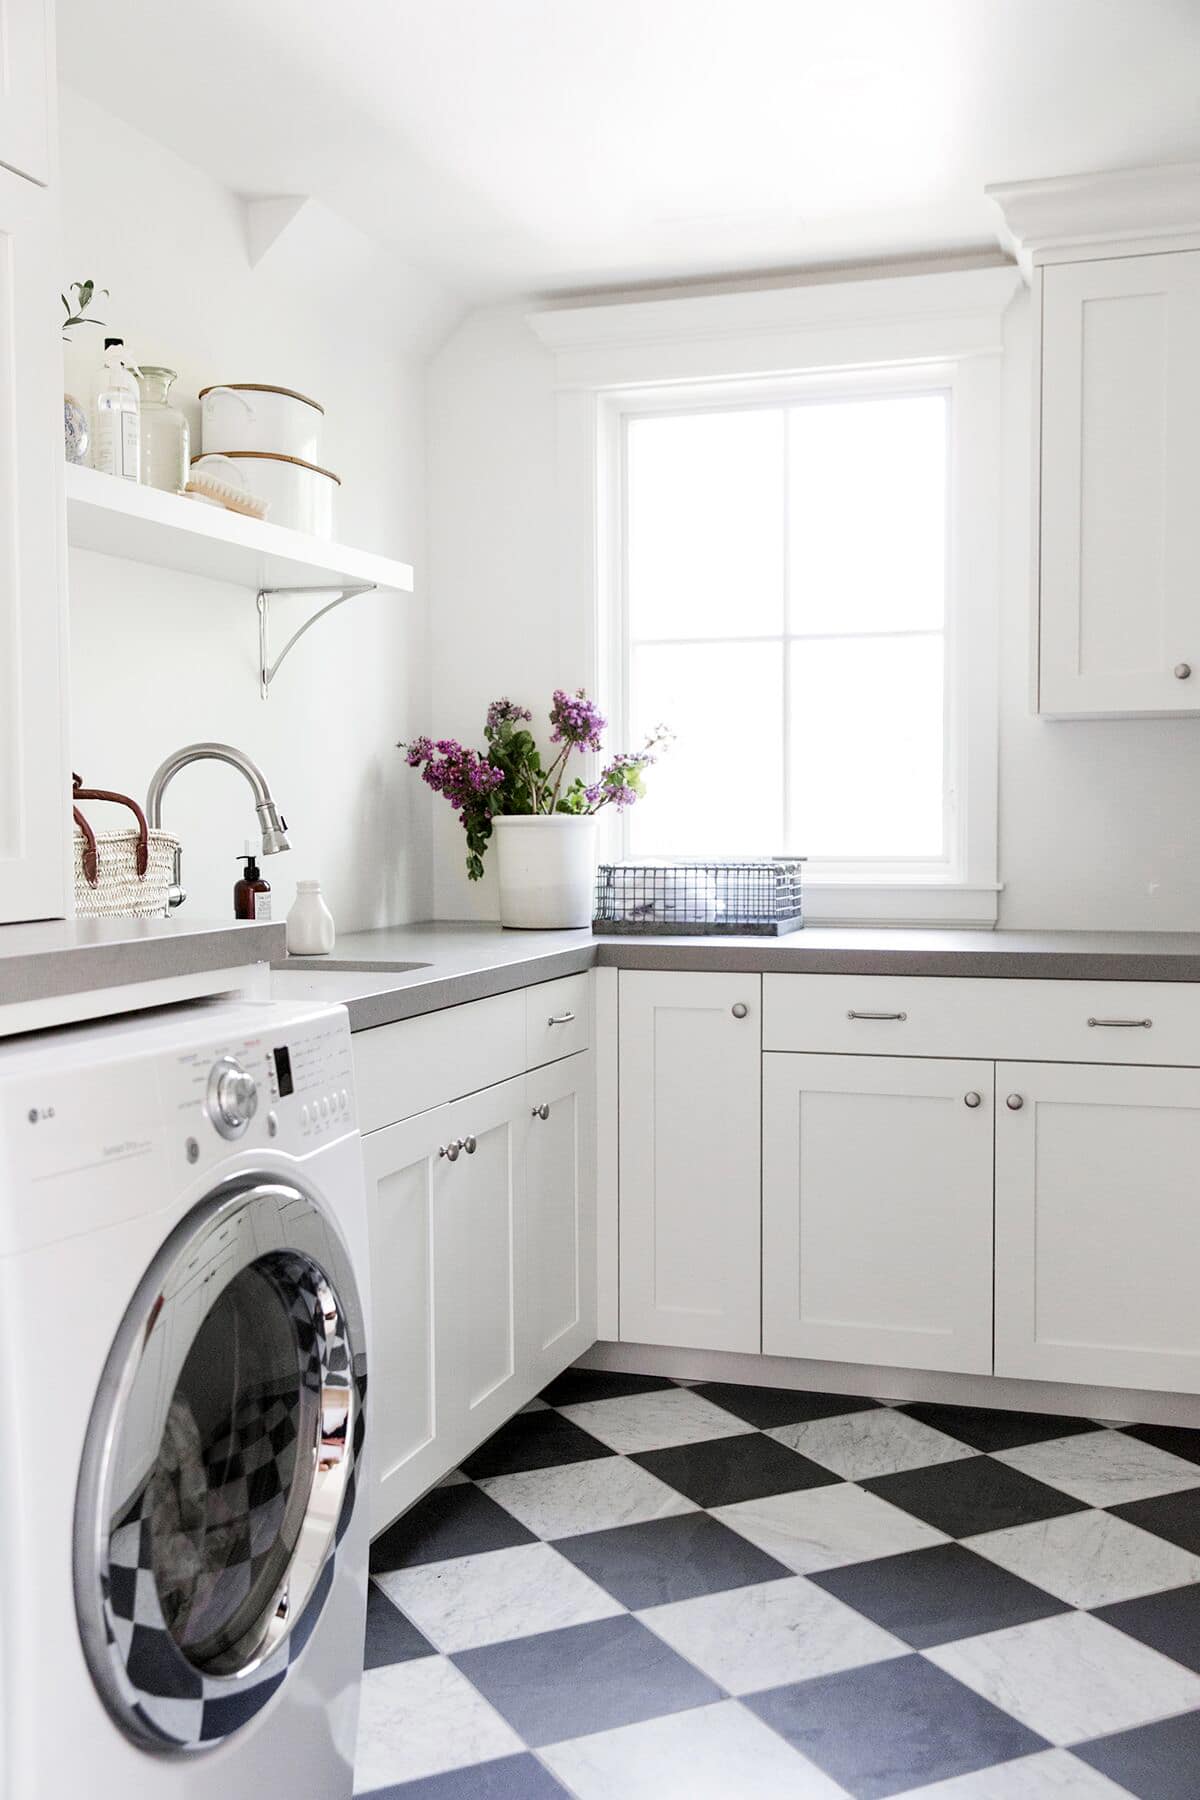 simple bright laundry room with black and white checkerboard tile by studio mcgee | coco kelleysimple bright laundry room with black and white checkerboard tile by studio mcgee | coco kelley